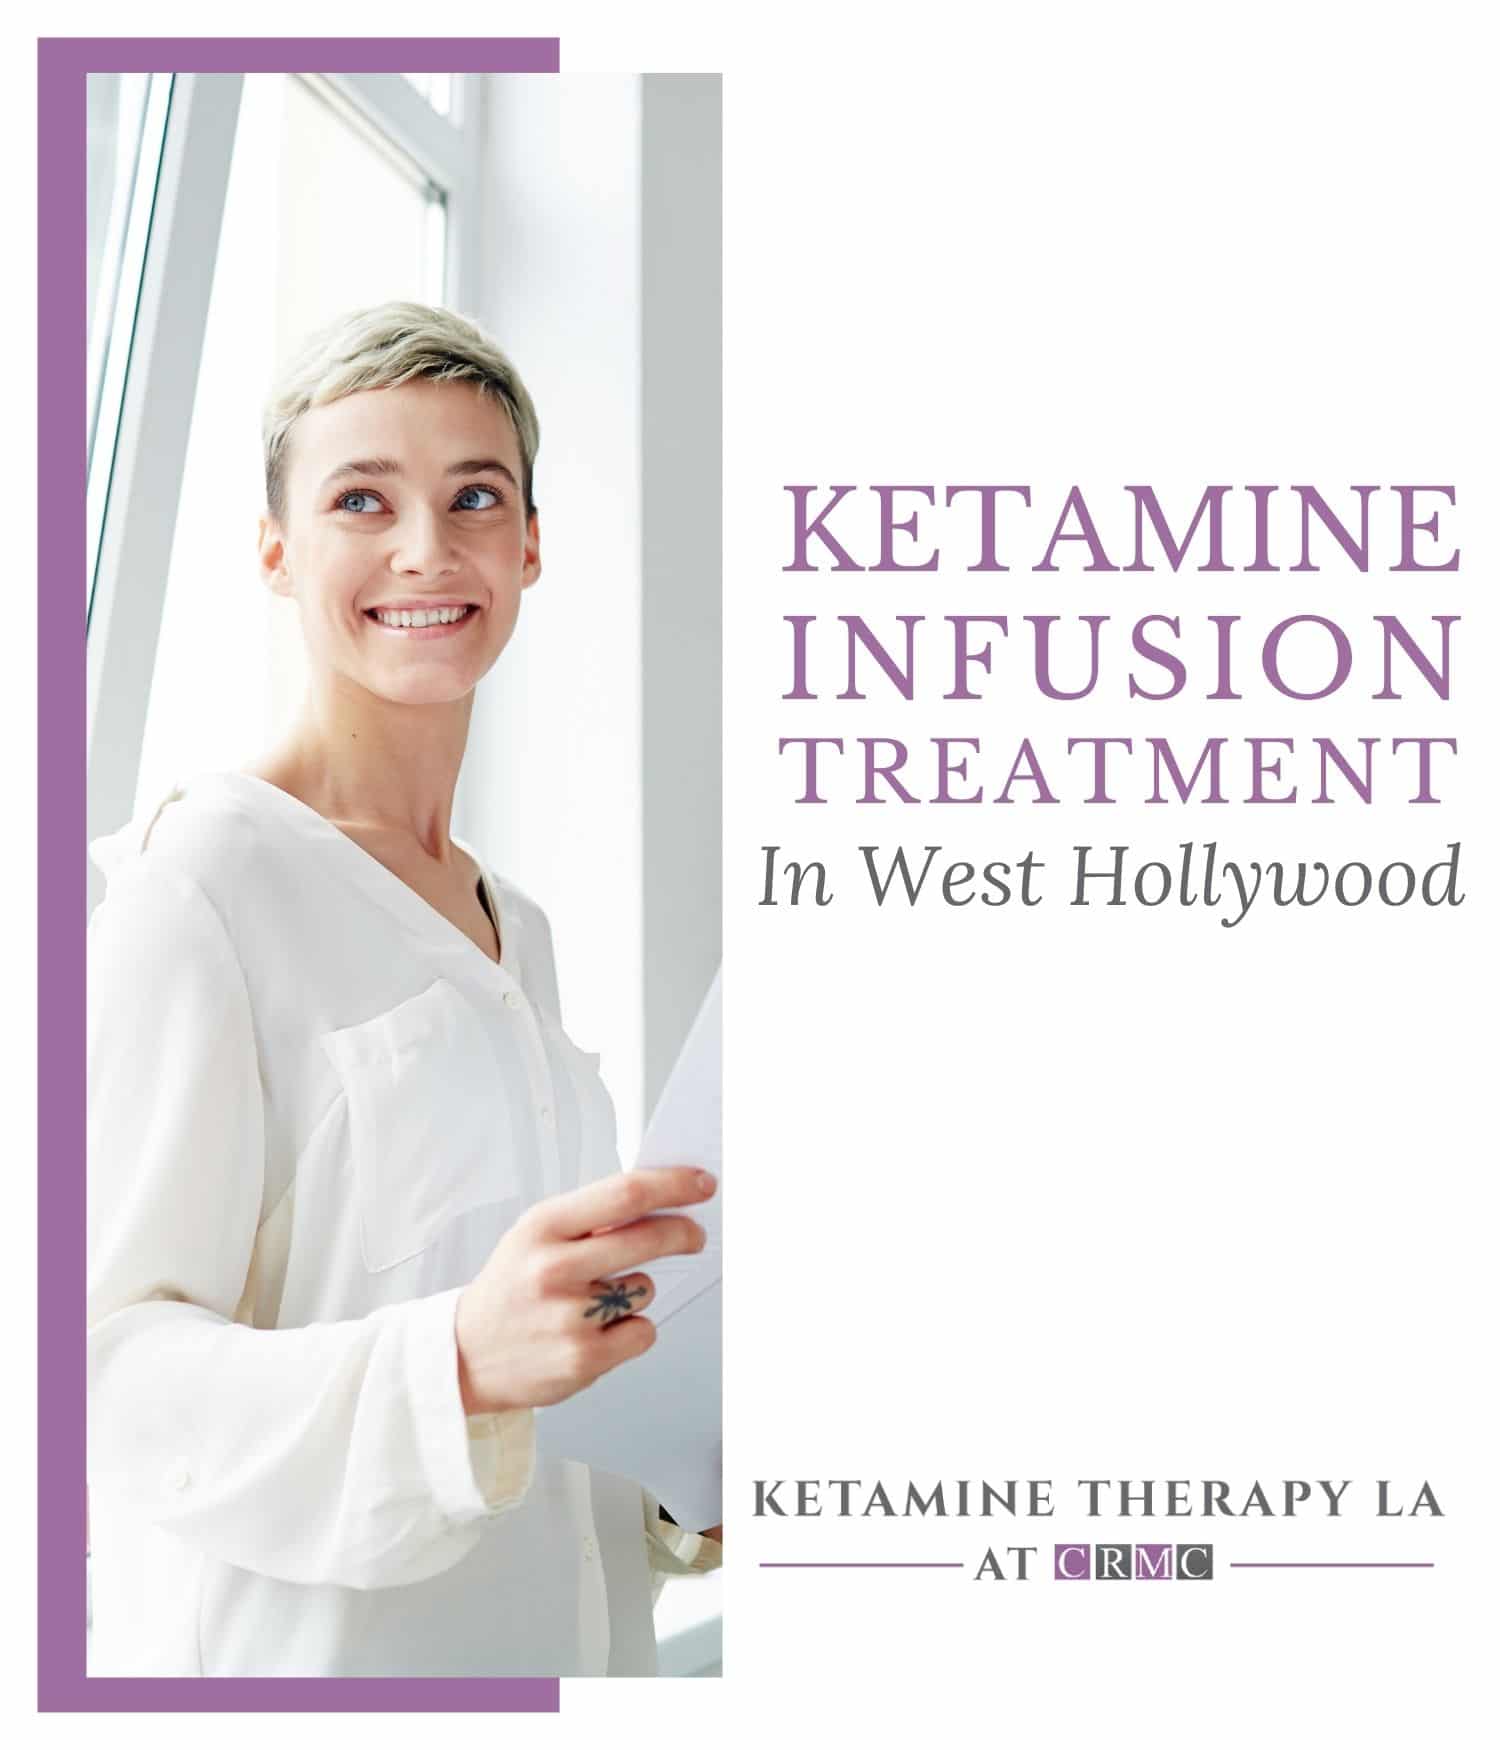 Woman smiling after ketamine infusion treatment in west hollywood.